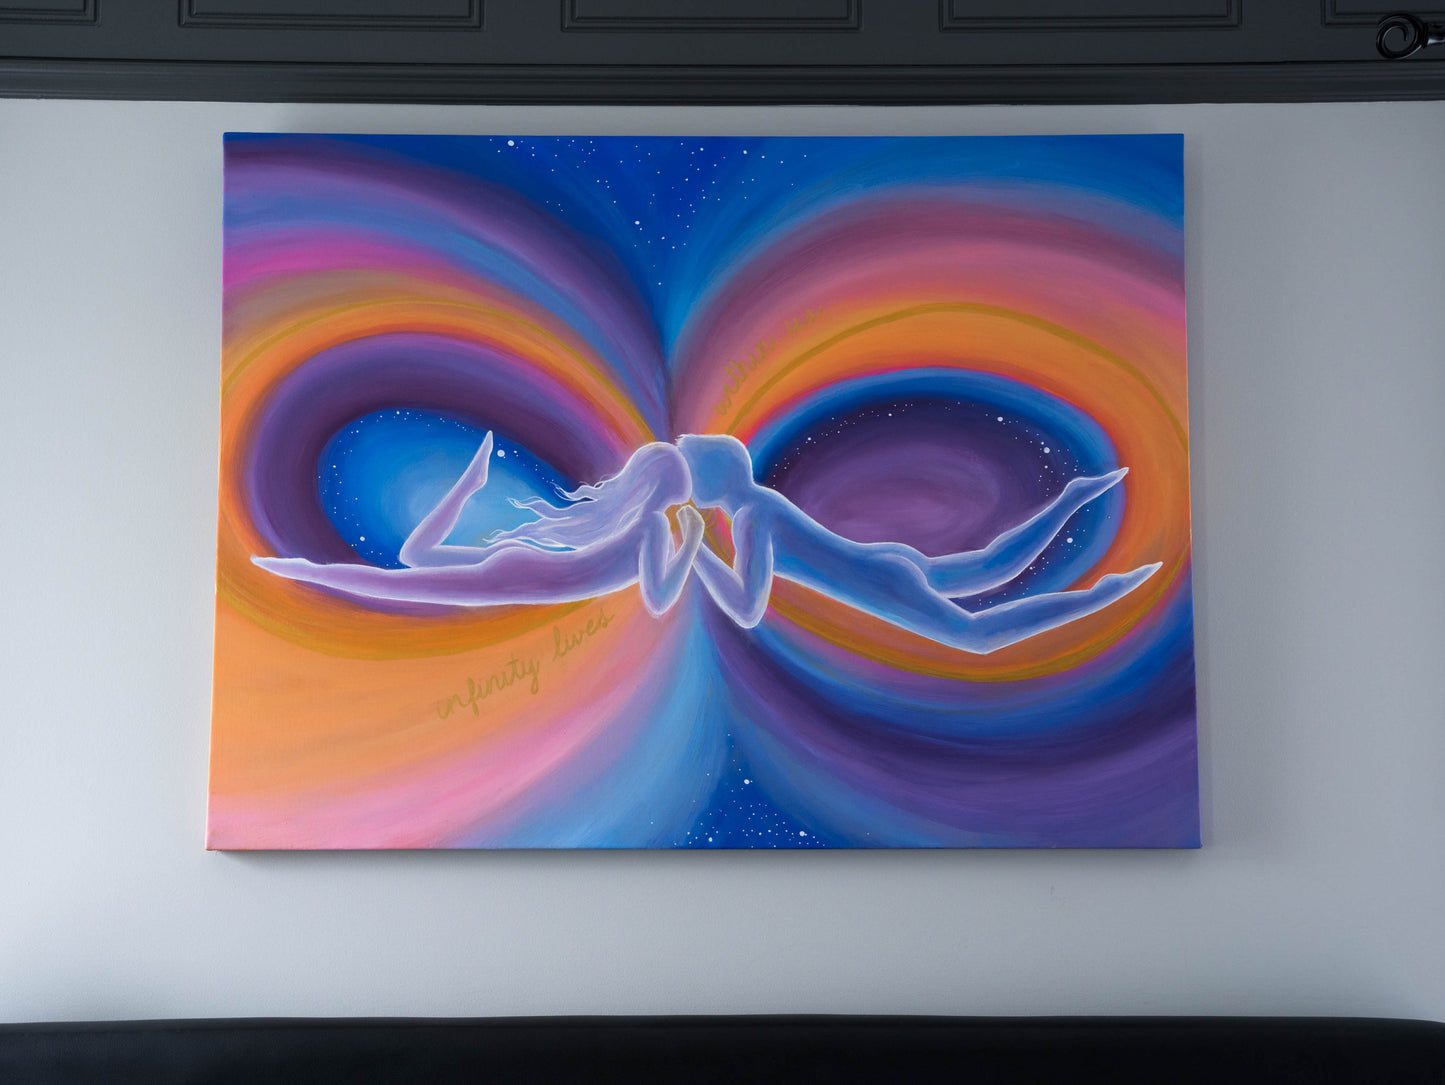 Soulmate Art, Infinity couple, Spiritual Painting, Chakra art, Fantasy, Twin Flames Reunion, Surreal and Romantic gift, Acrylic painting on canvas